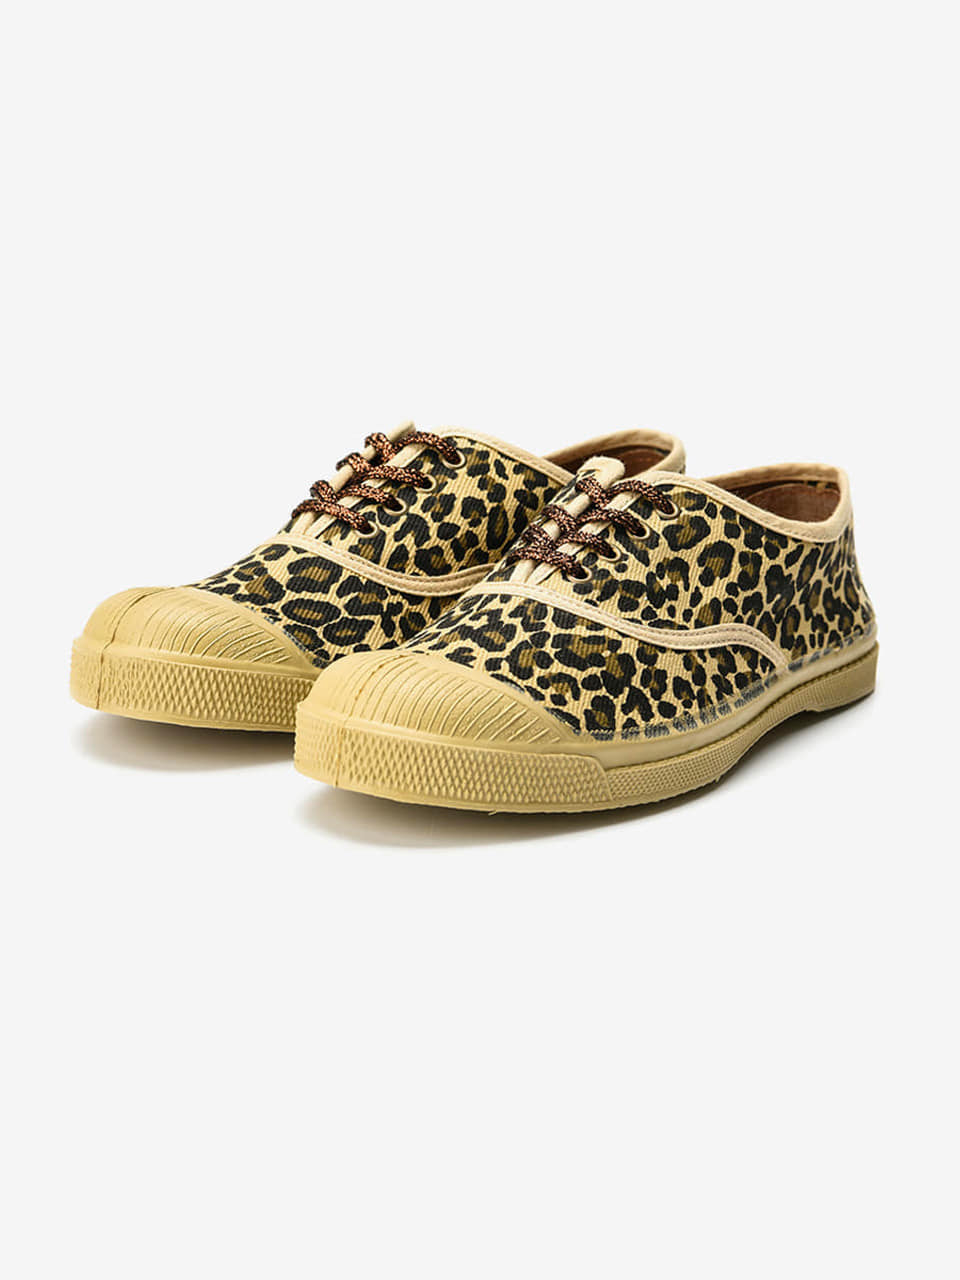 LIMITED LACET PANTHER - SAND